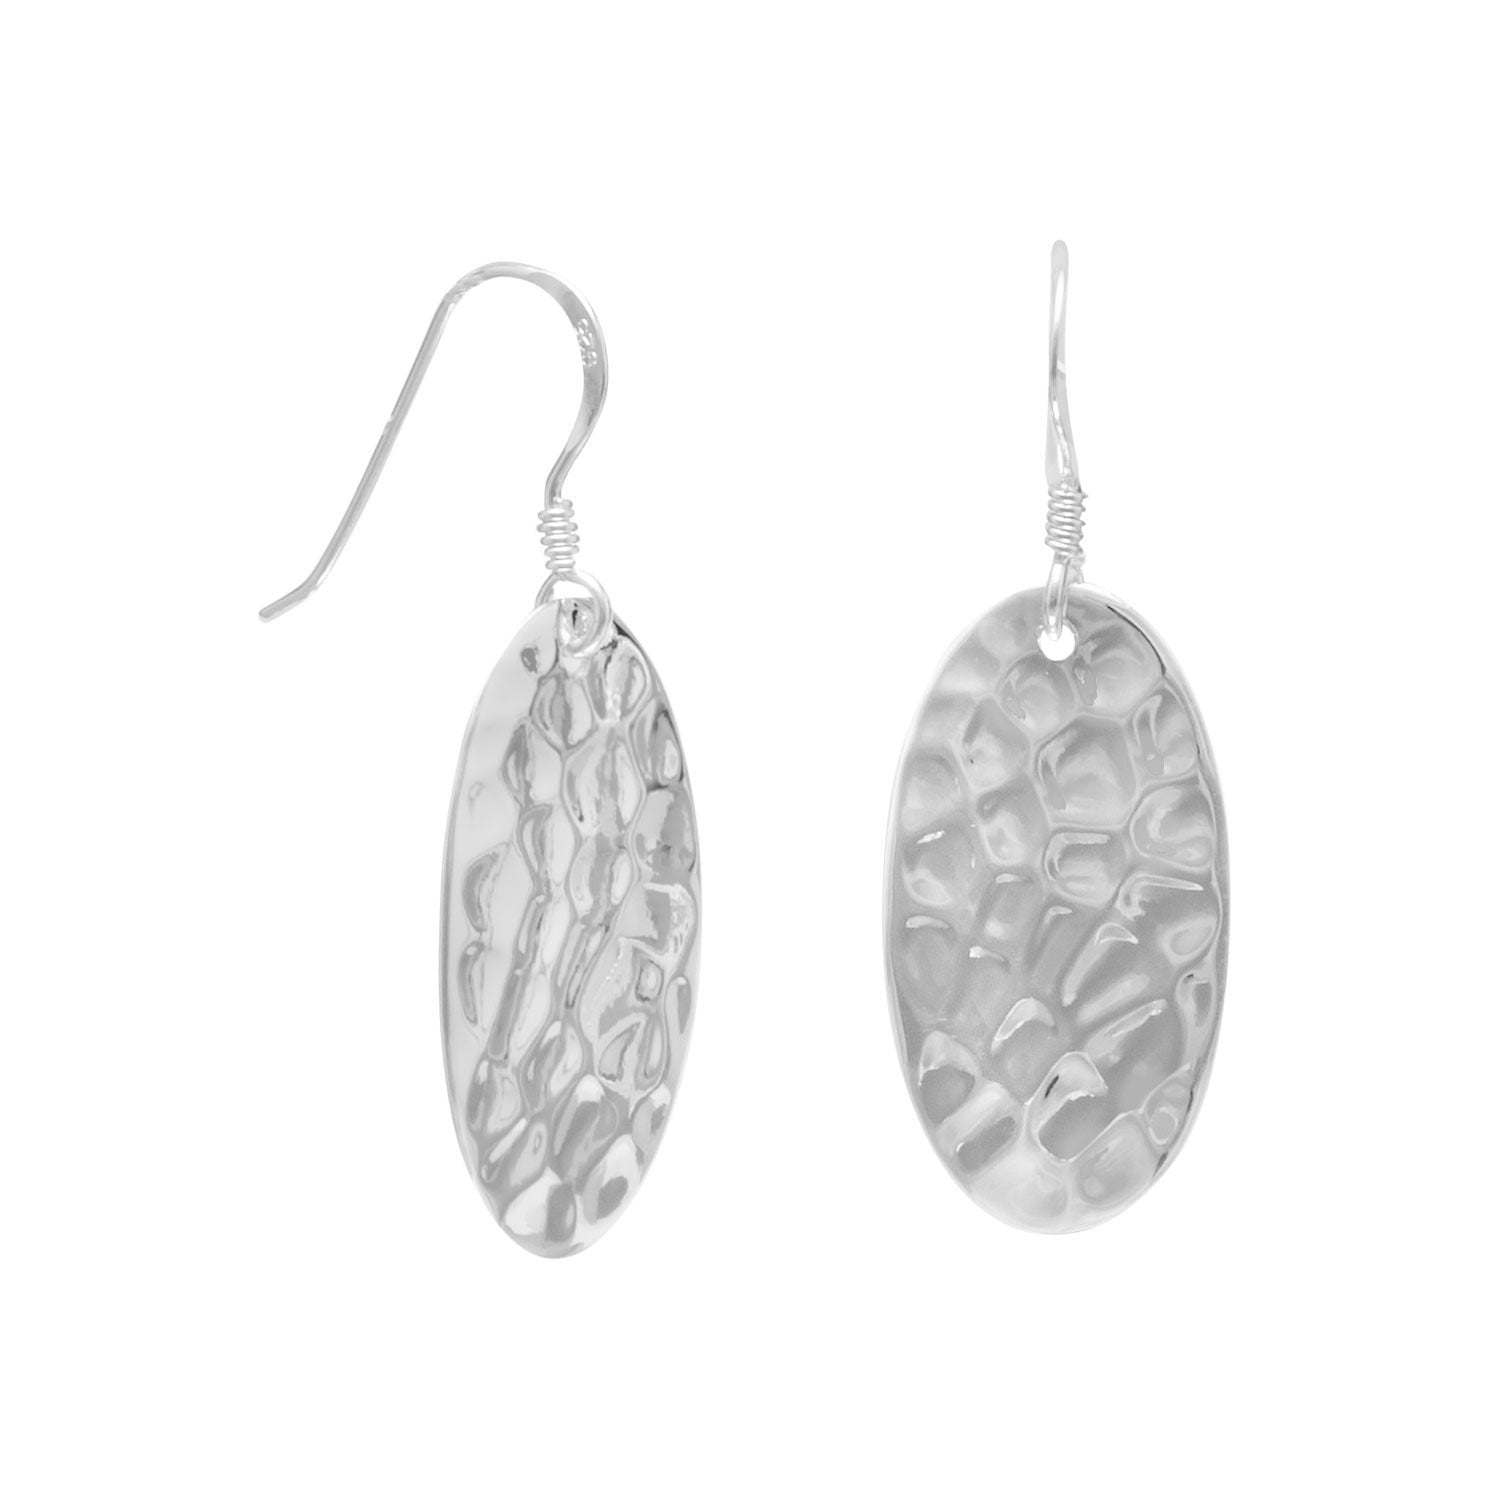 Small Oval Hammered French Wire Earrings - Joyeria Lady